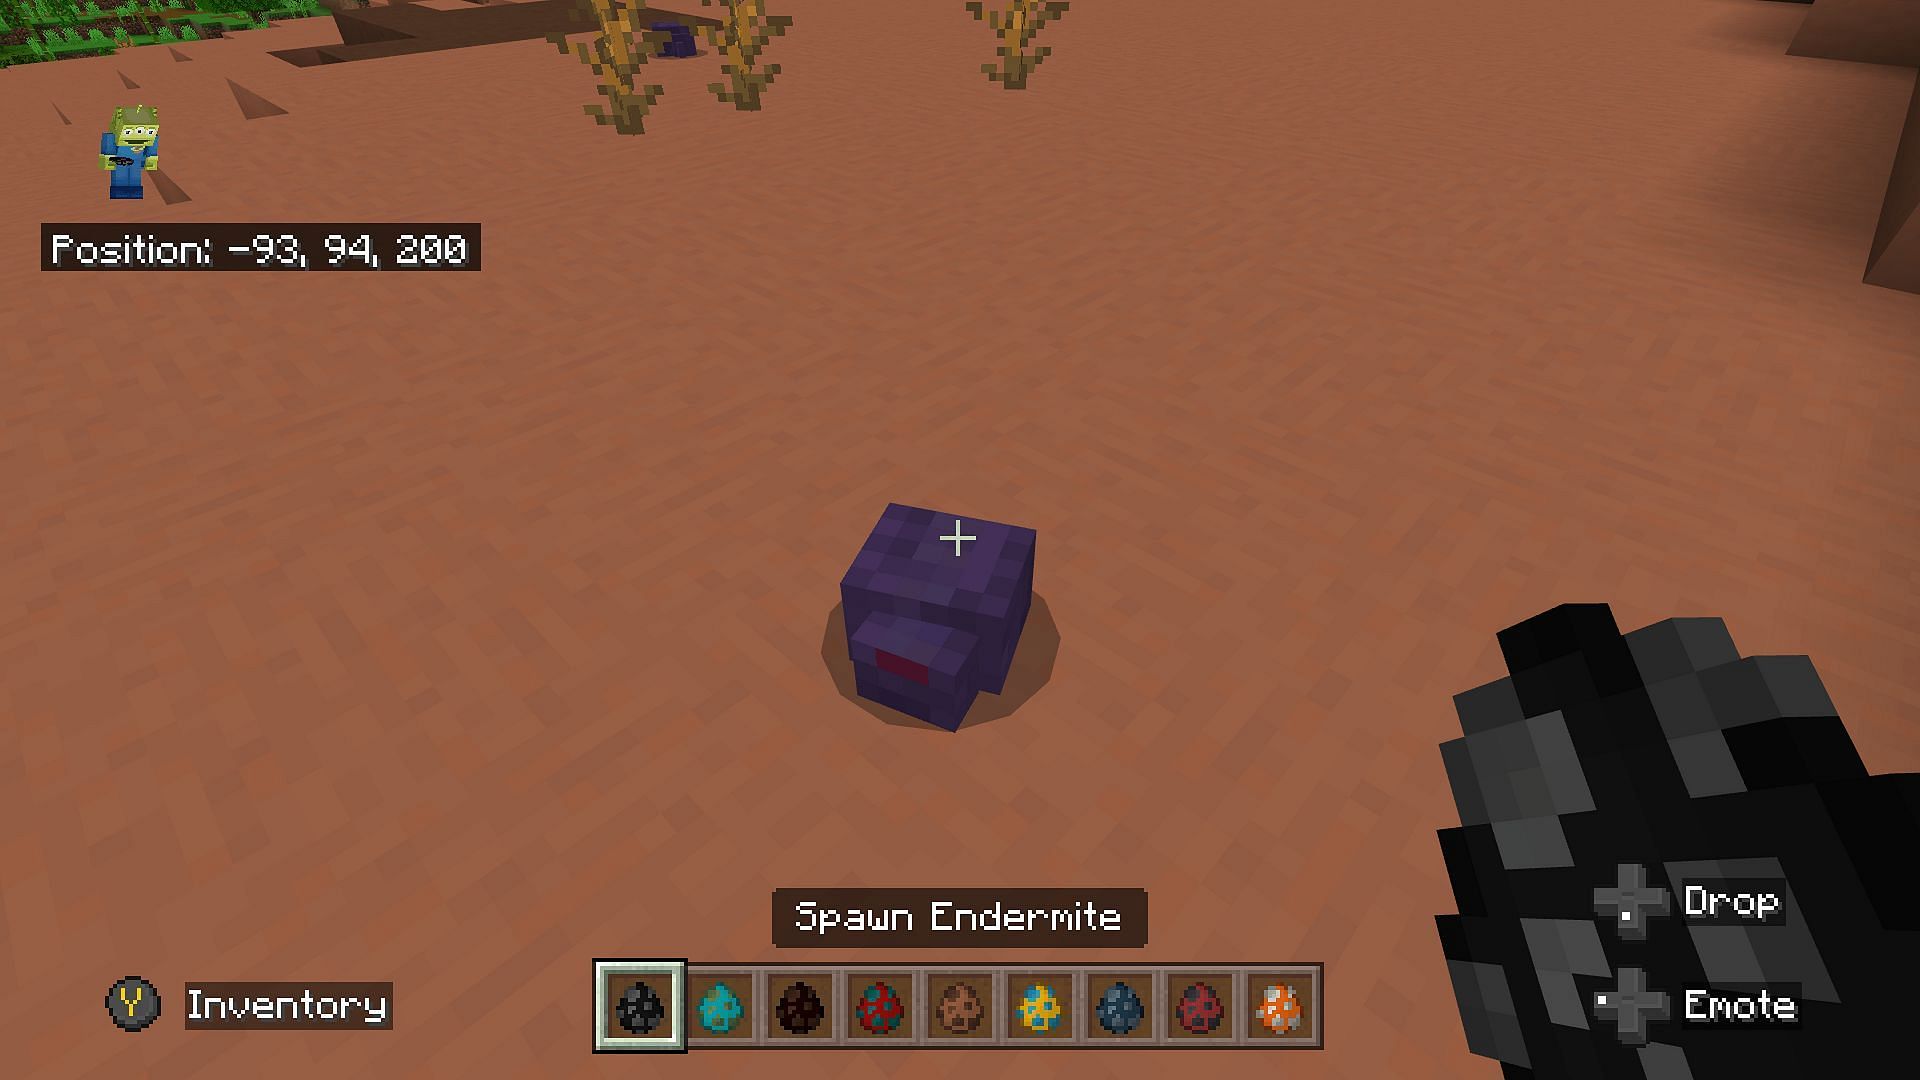 An endermite spawned by the use of a spawn egg (Image via Mojang)